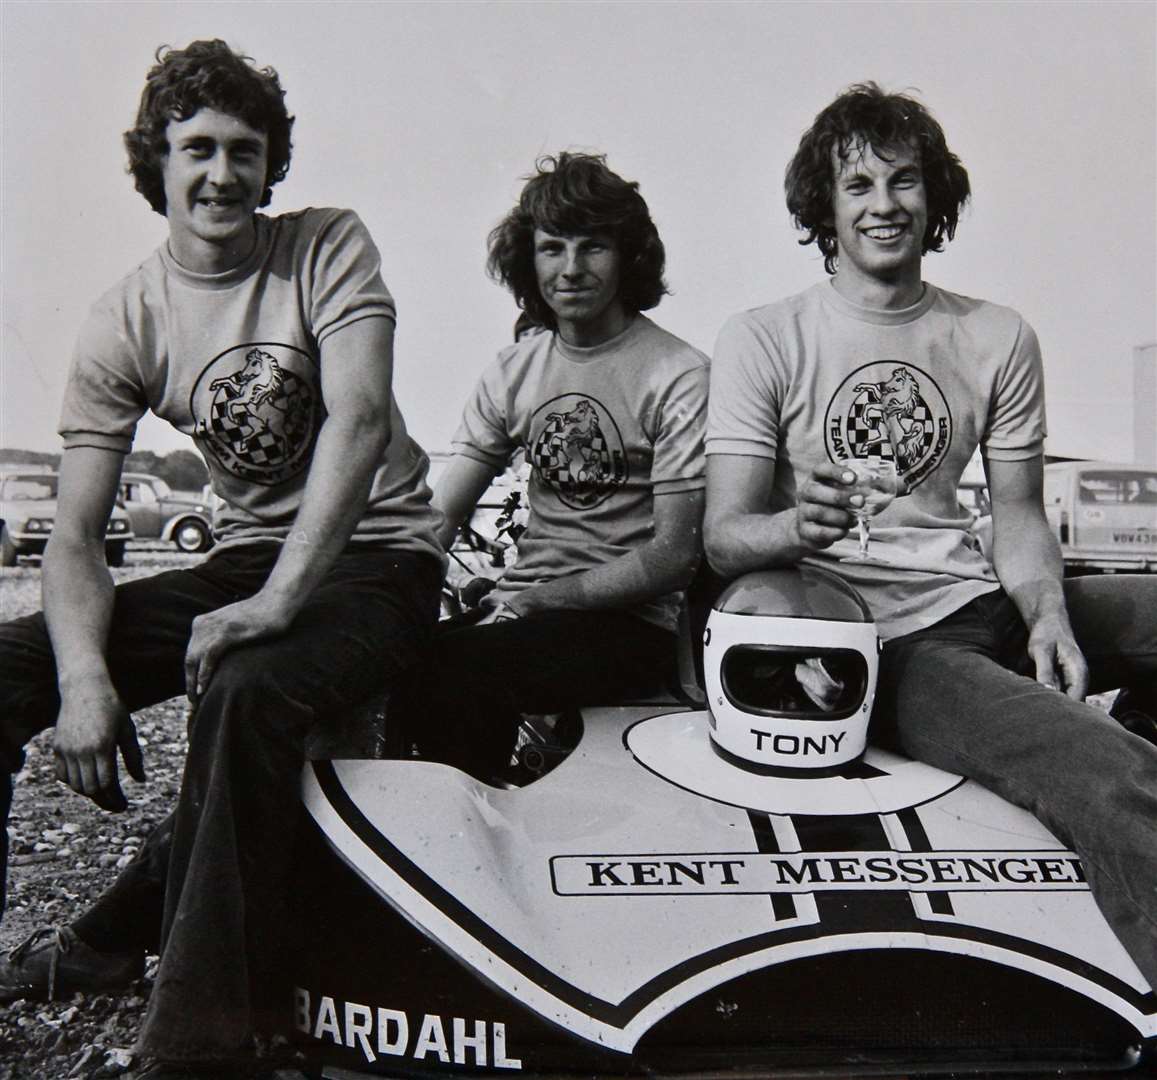 Brise, right, with his Team Kent Messenger Racing crew in the early 1970s